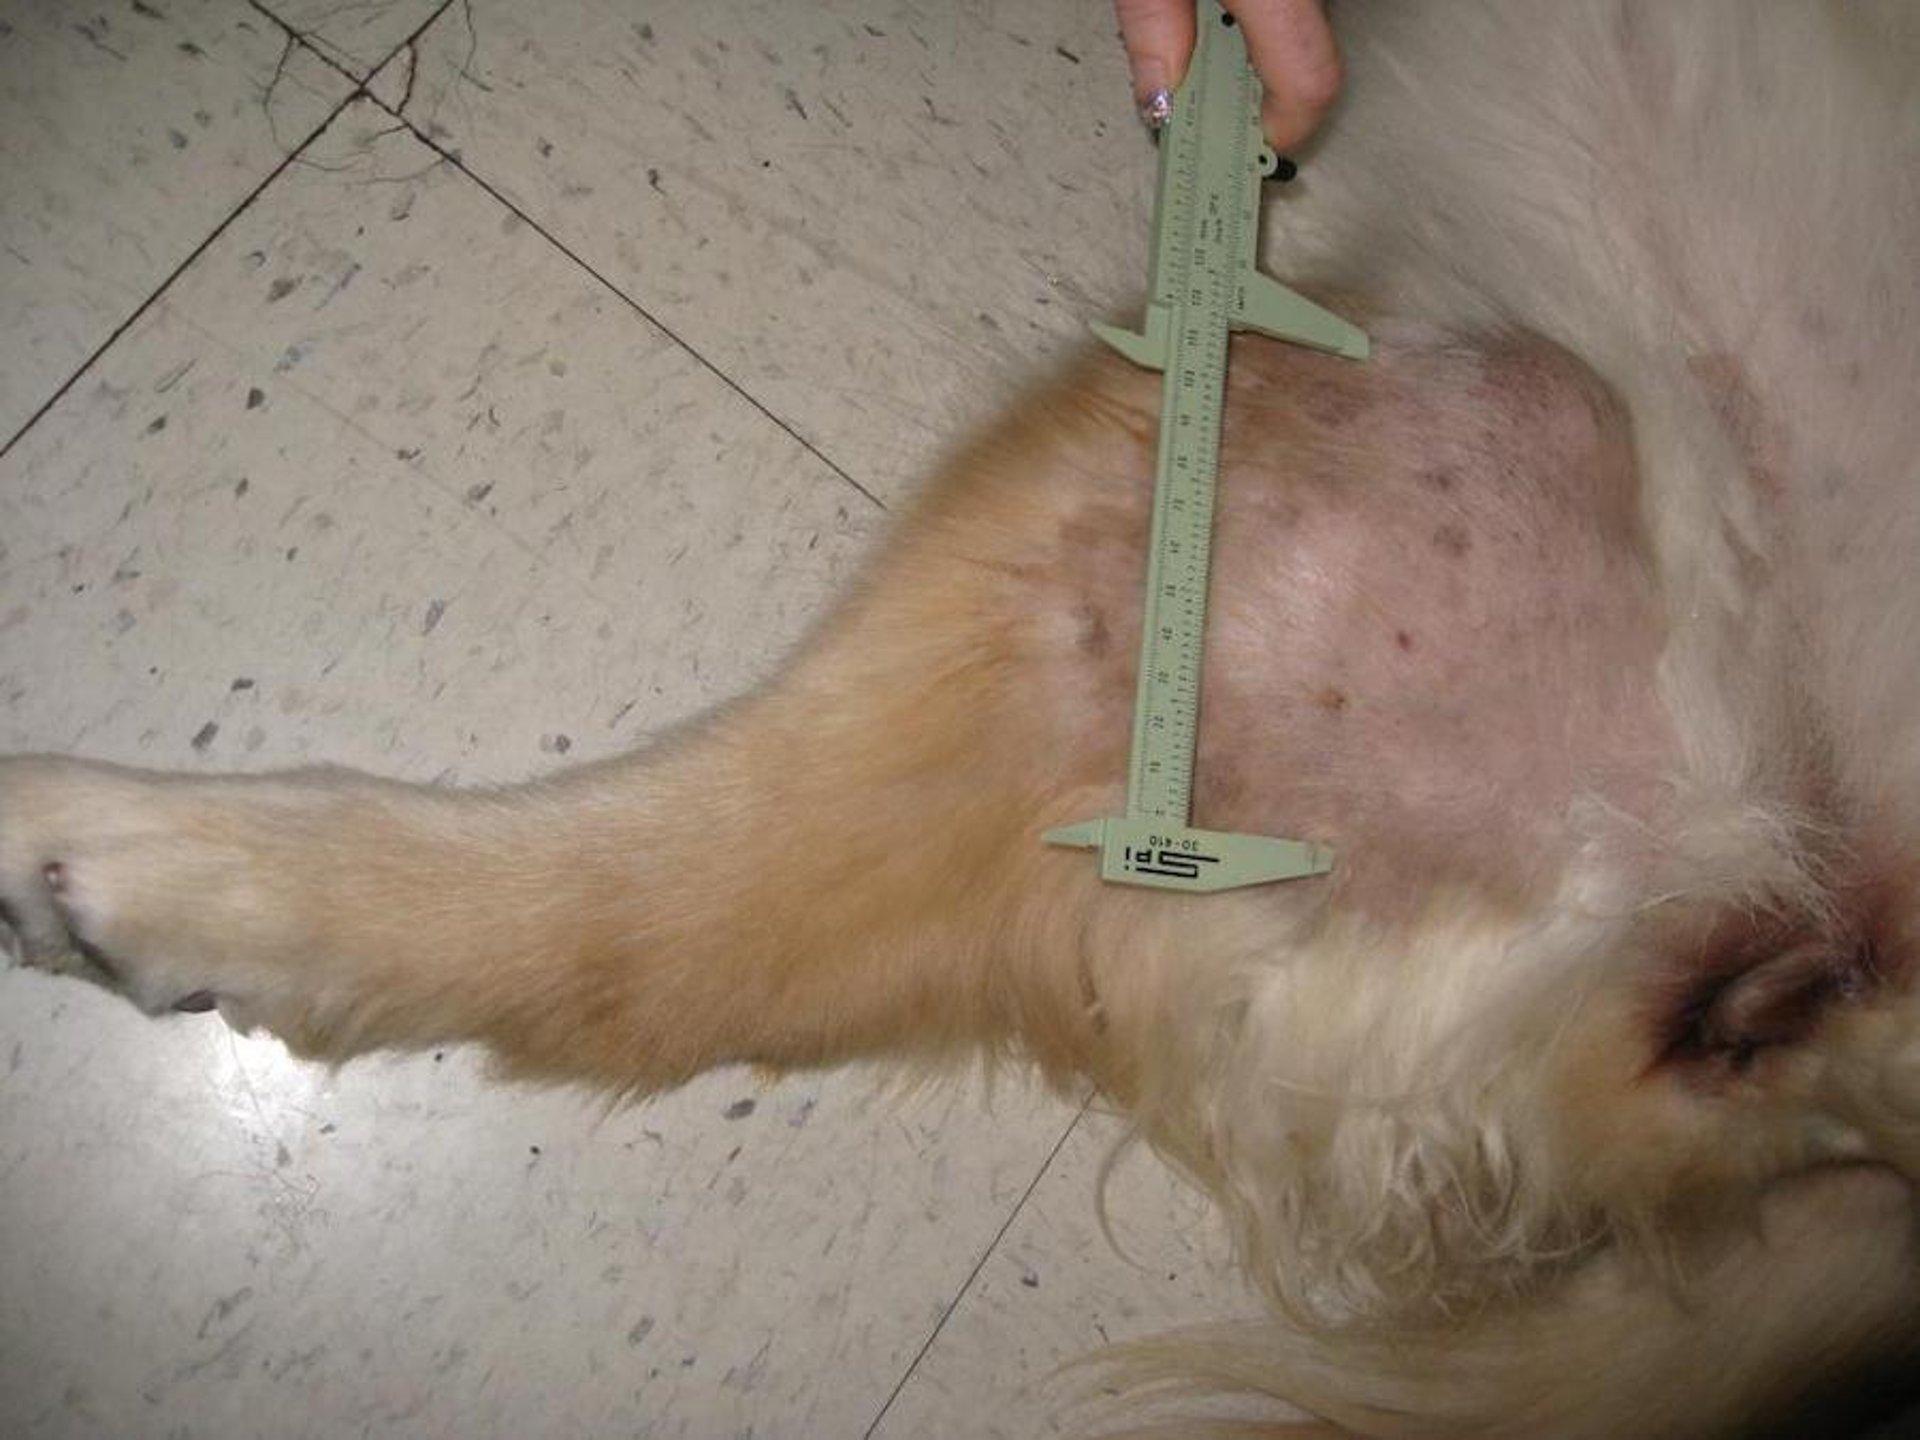 Undifferentiated sarcoma in medial right thigh, spayed female Golden Retriever